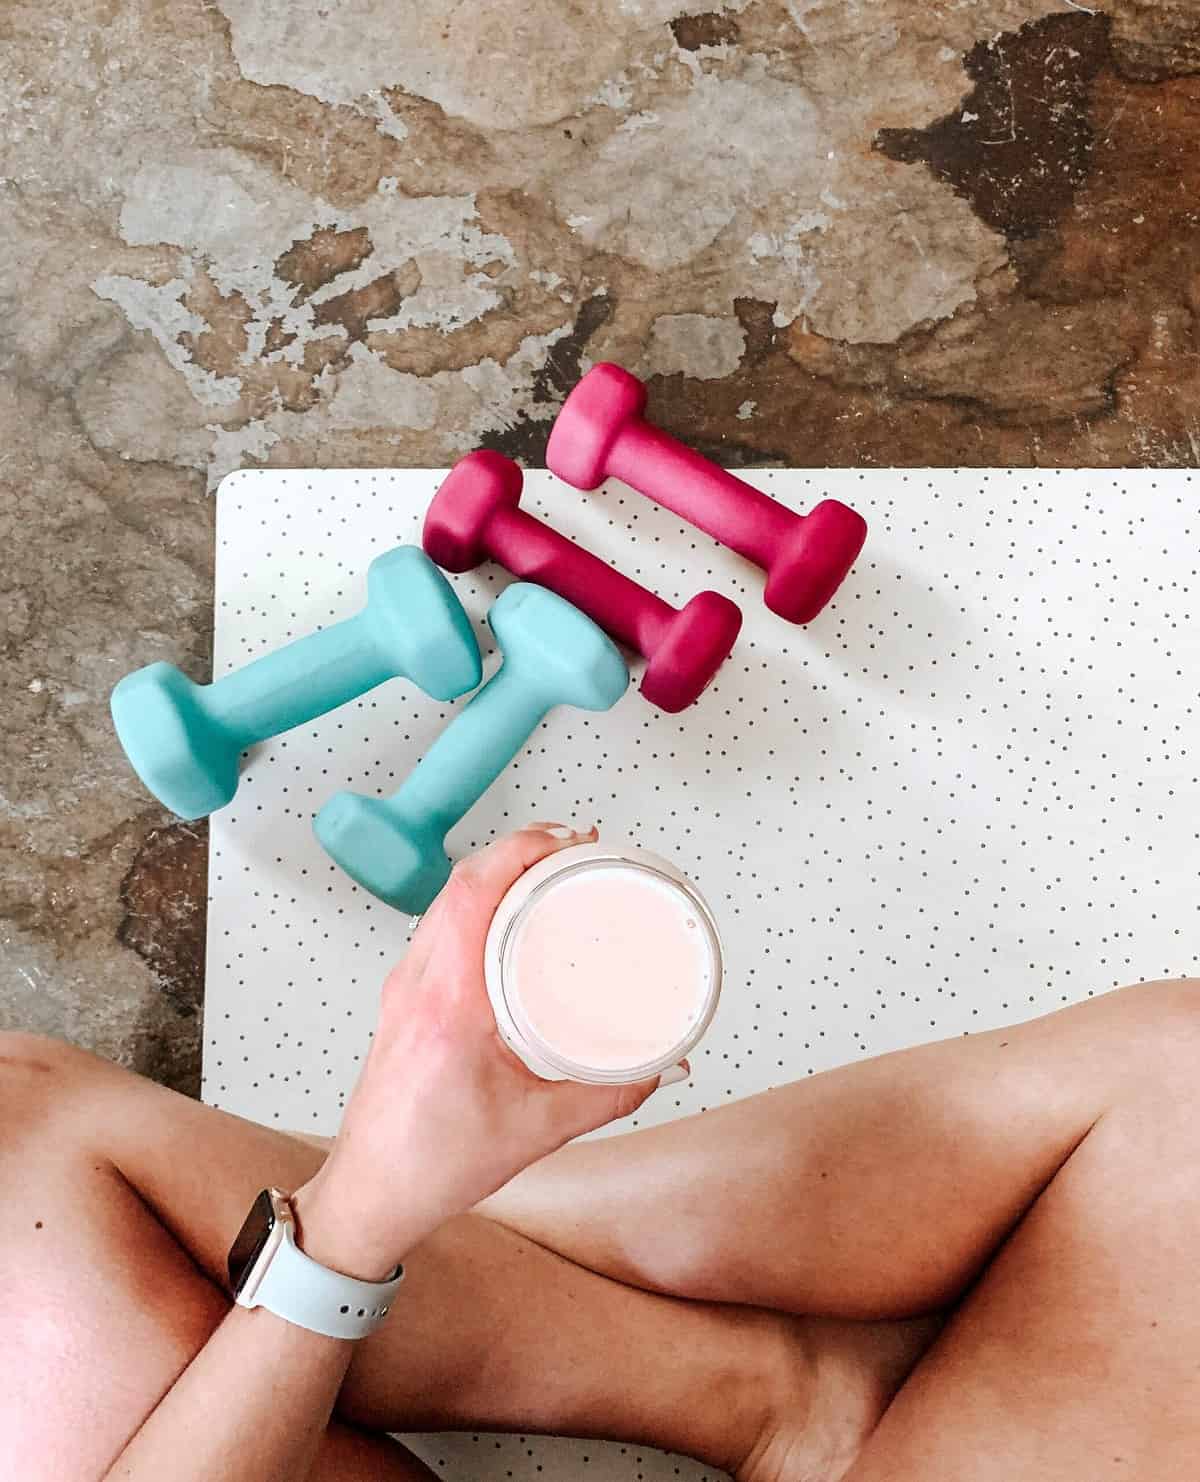 Birds eye view of person holding shakeology drink and surrounded by weights.